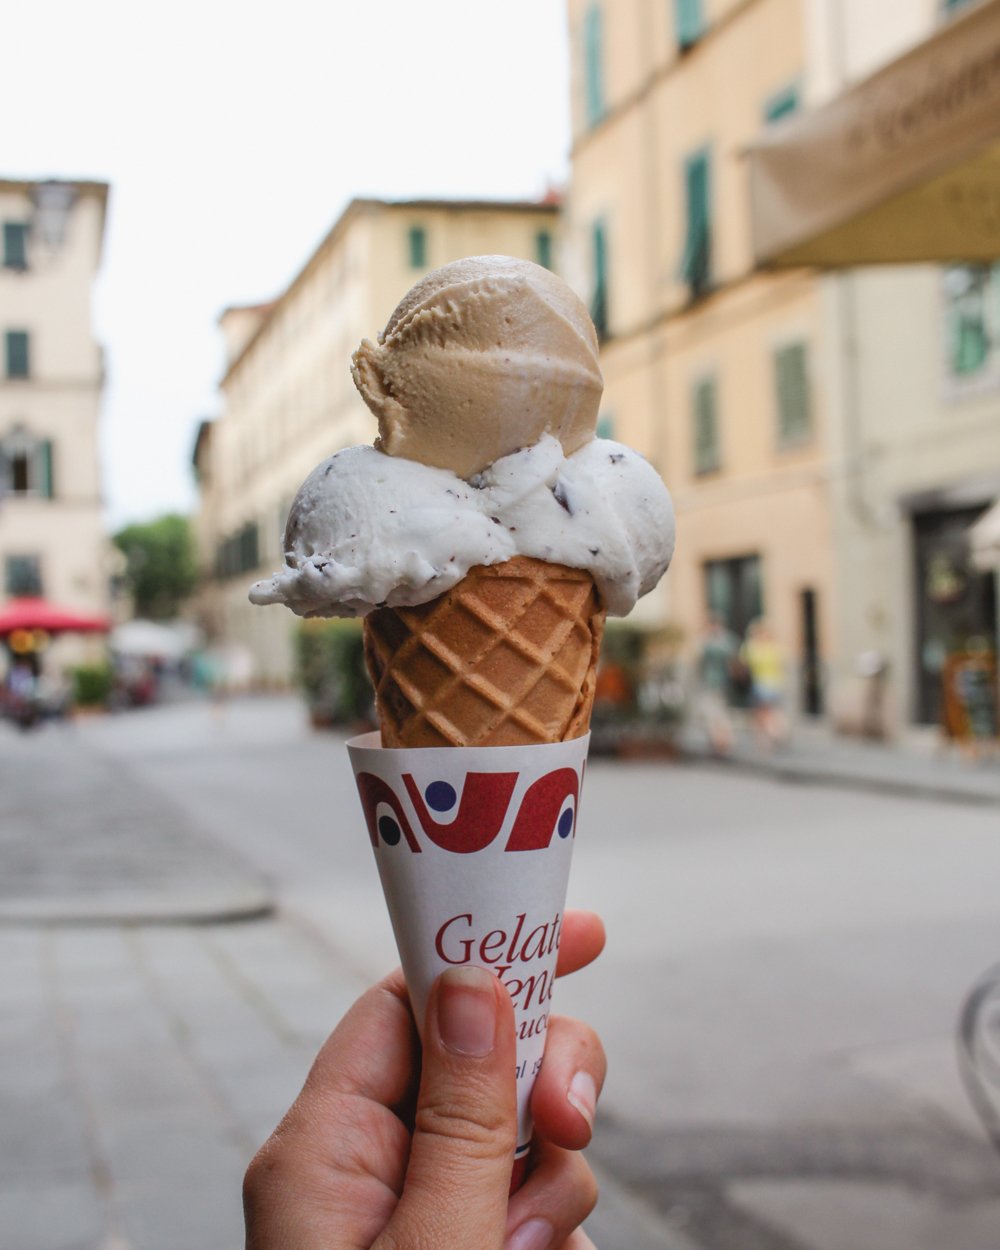 Gelato in Lucca, Tuscany